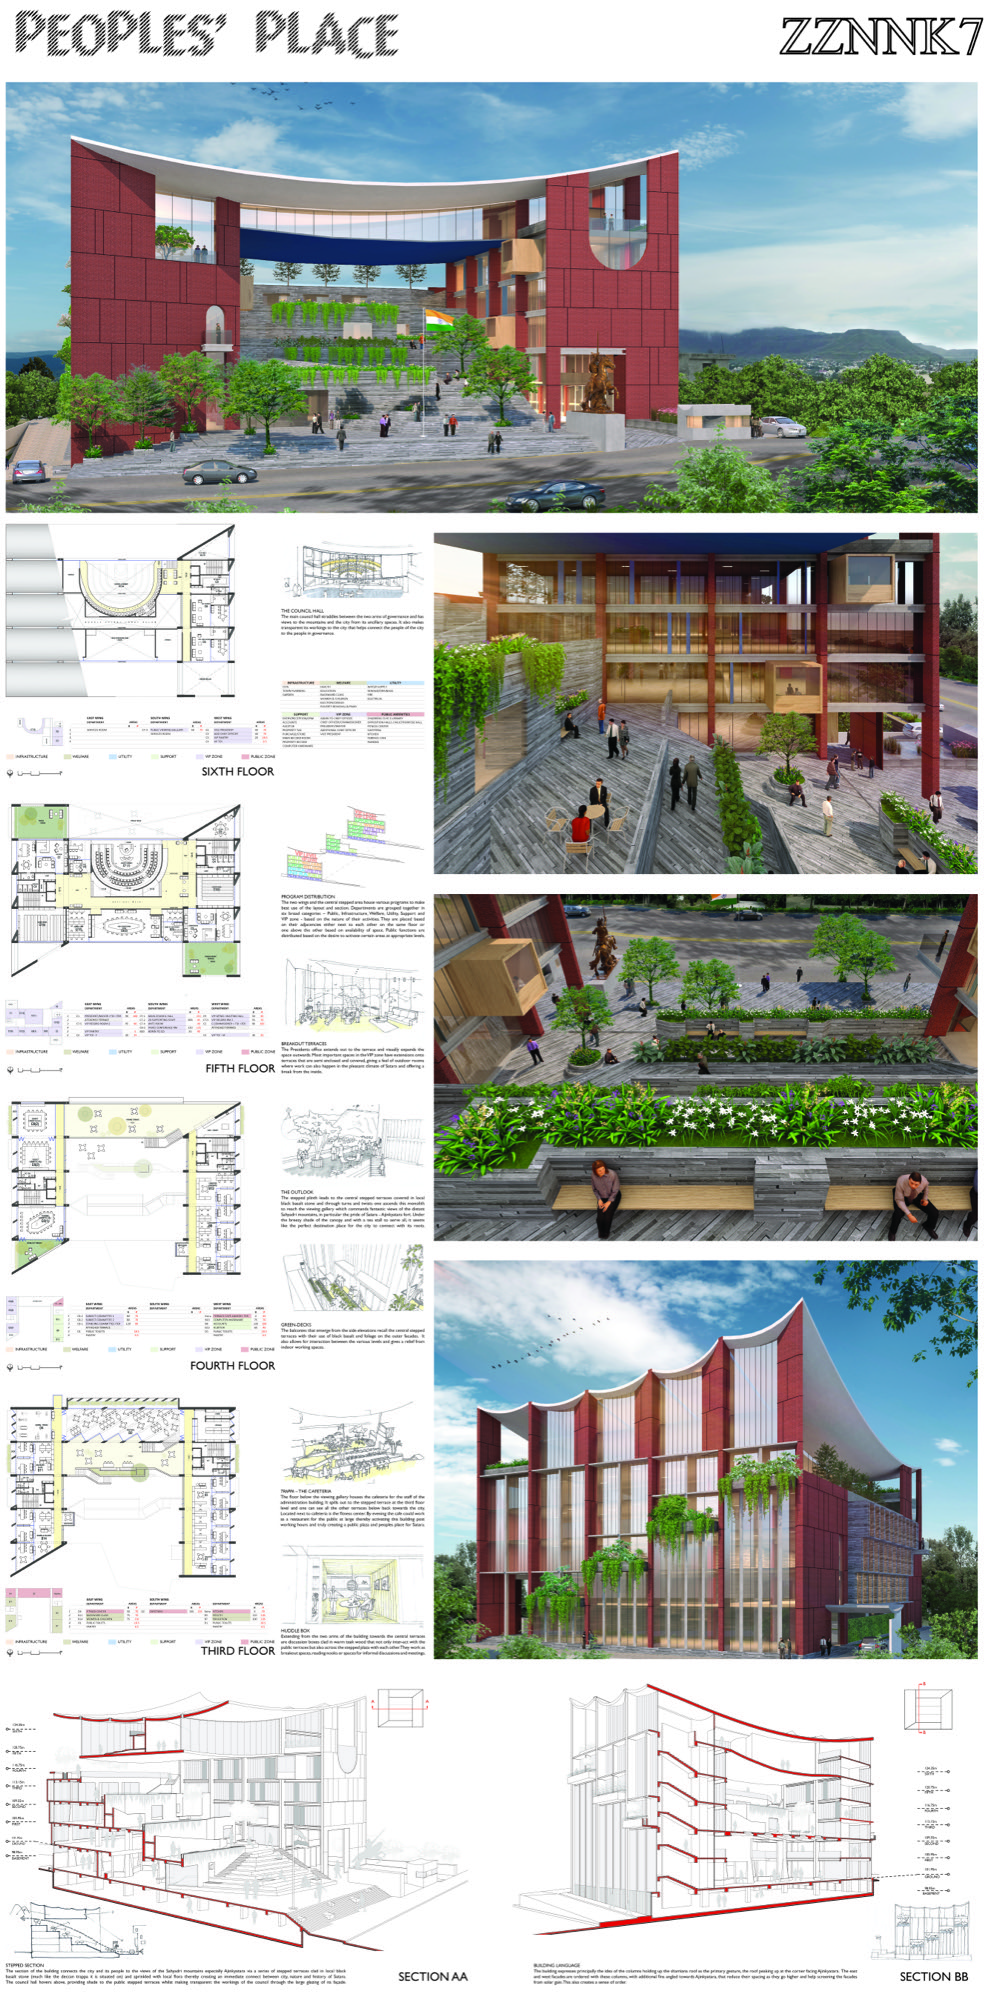 For People: Satara Municipal Corporation, competition entry by S+Ps - Pinkish Shah and Shilpa Gore 22